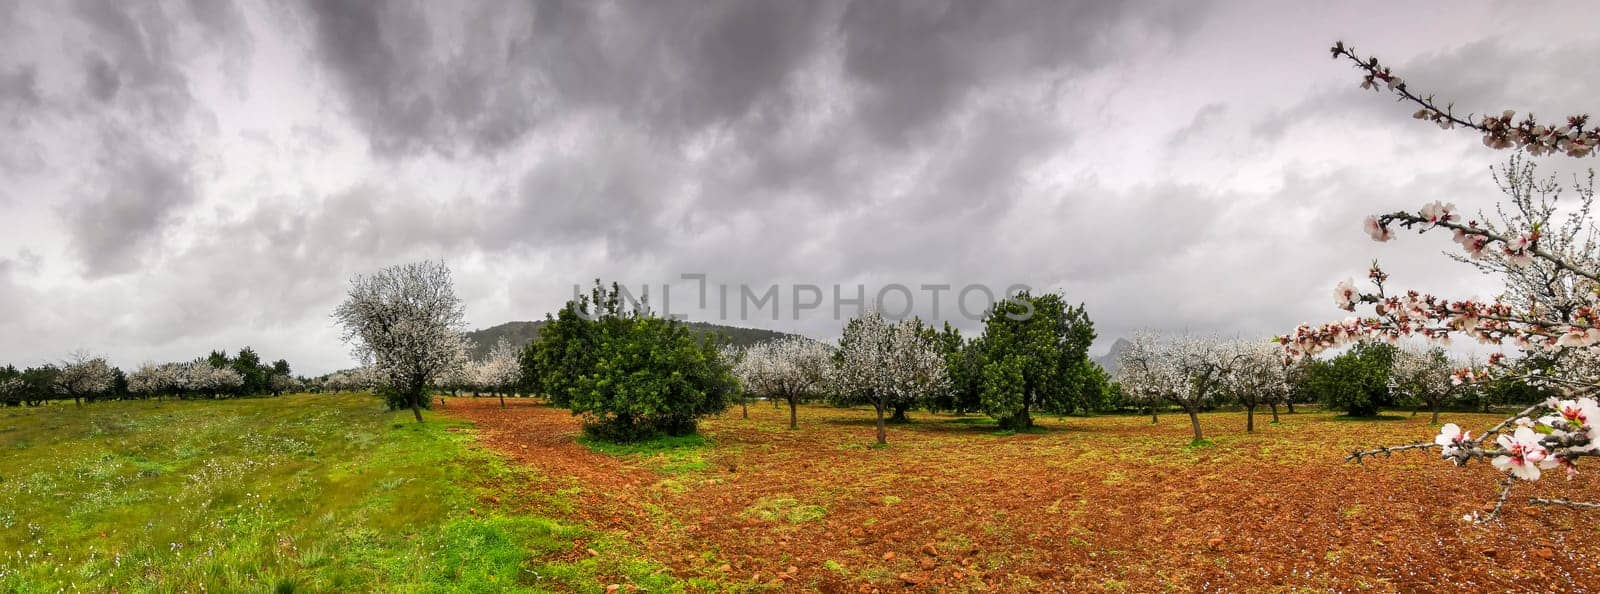 Spring's Resilience: Almond Blossoms Thrive Under a Stormy Sky by Juanjo39